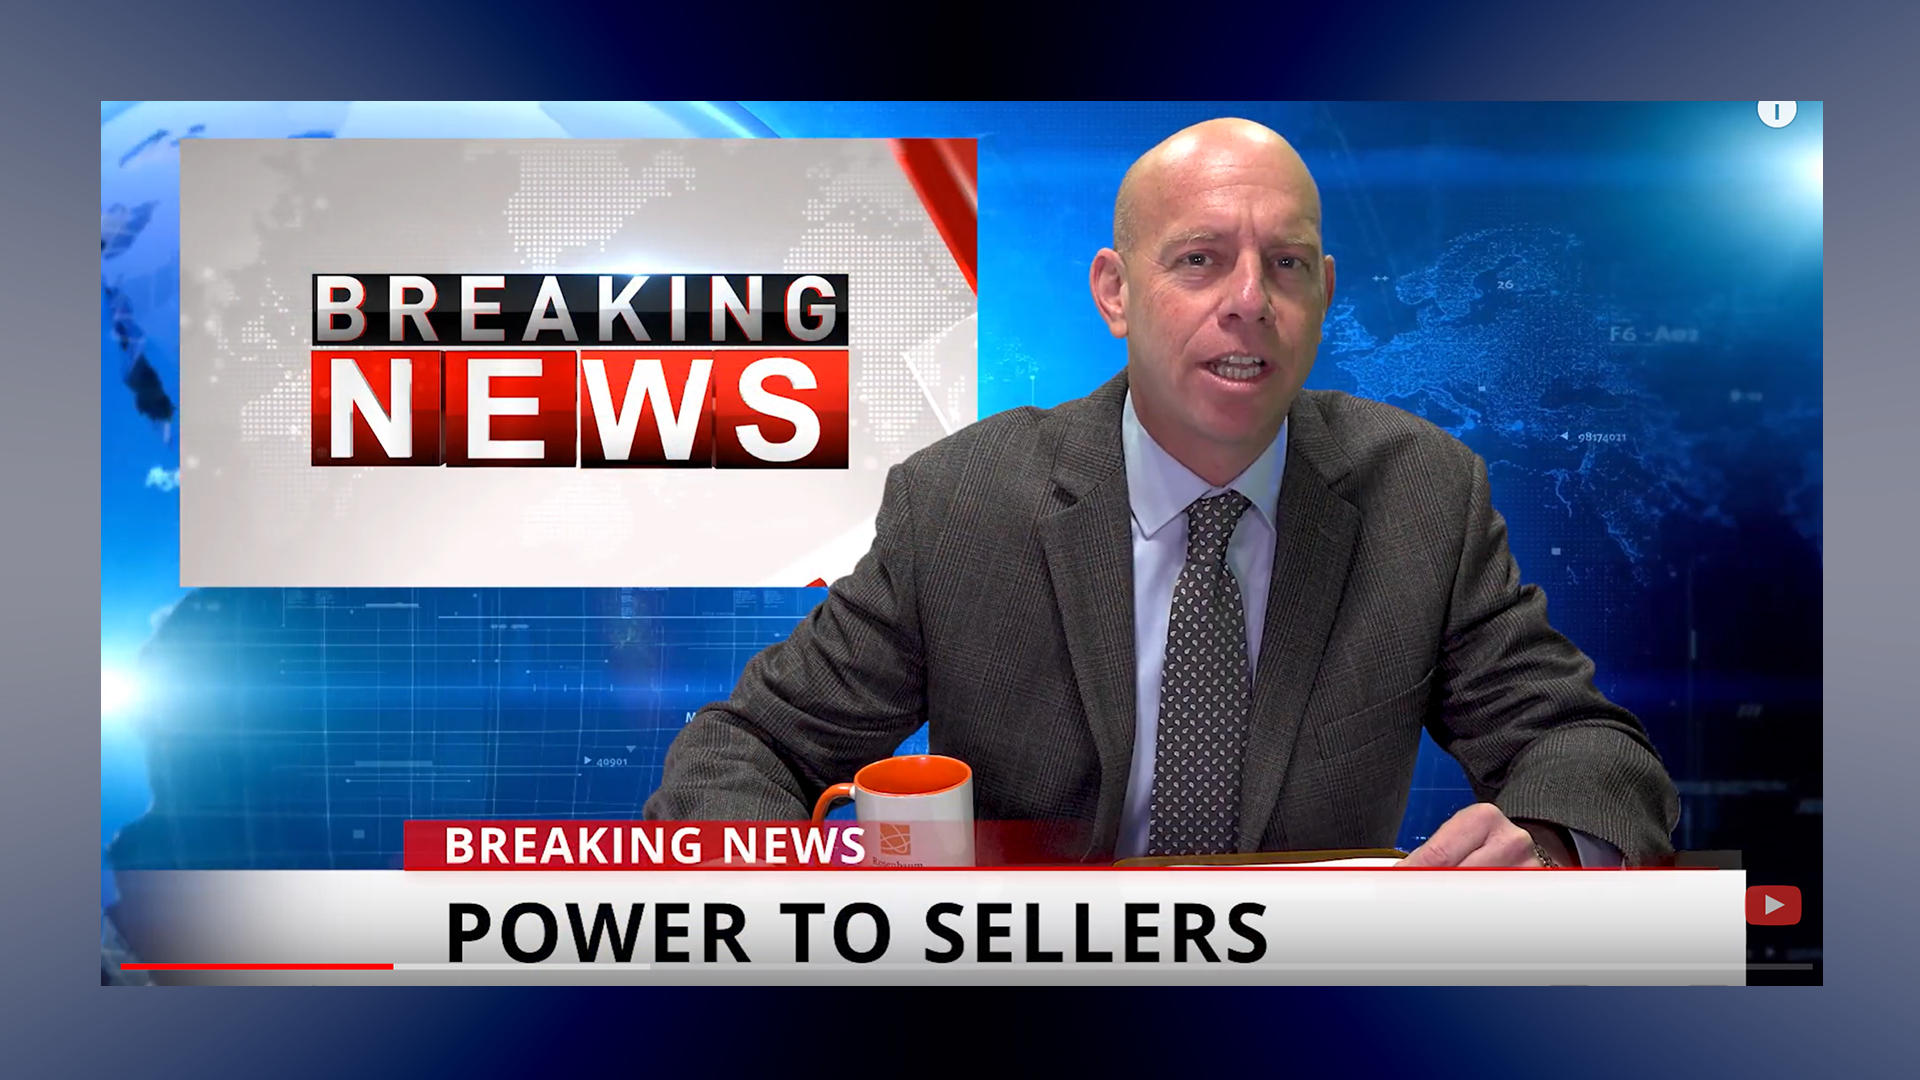 Amazon Sellers’ News 12/30/19 - POWER TO AMAZON SELLERS, Related Accounts & Avoid Selling HEMP-CBD Products That Cause Suspensions